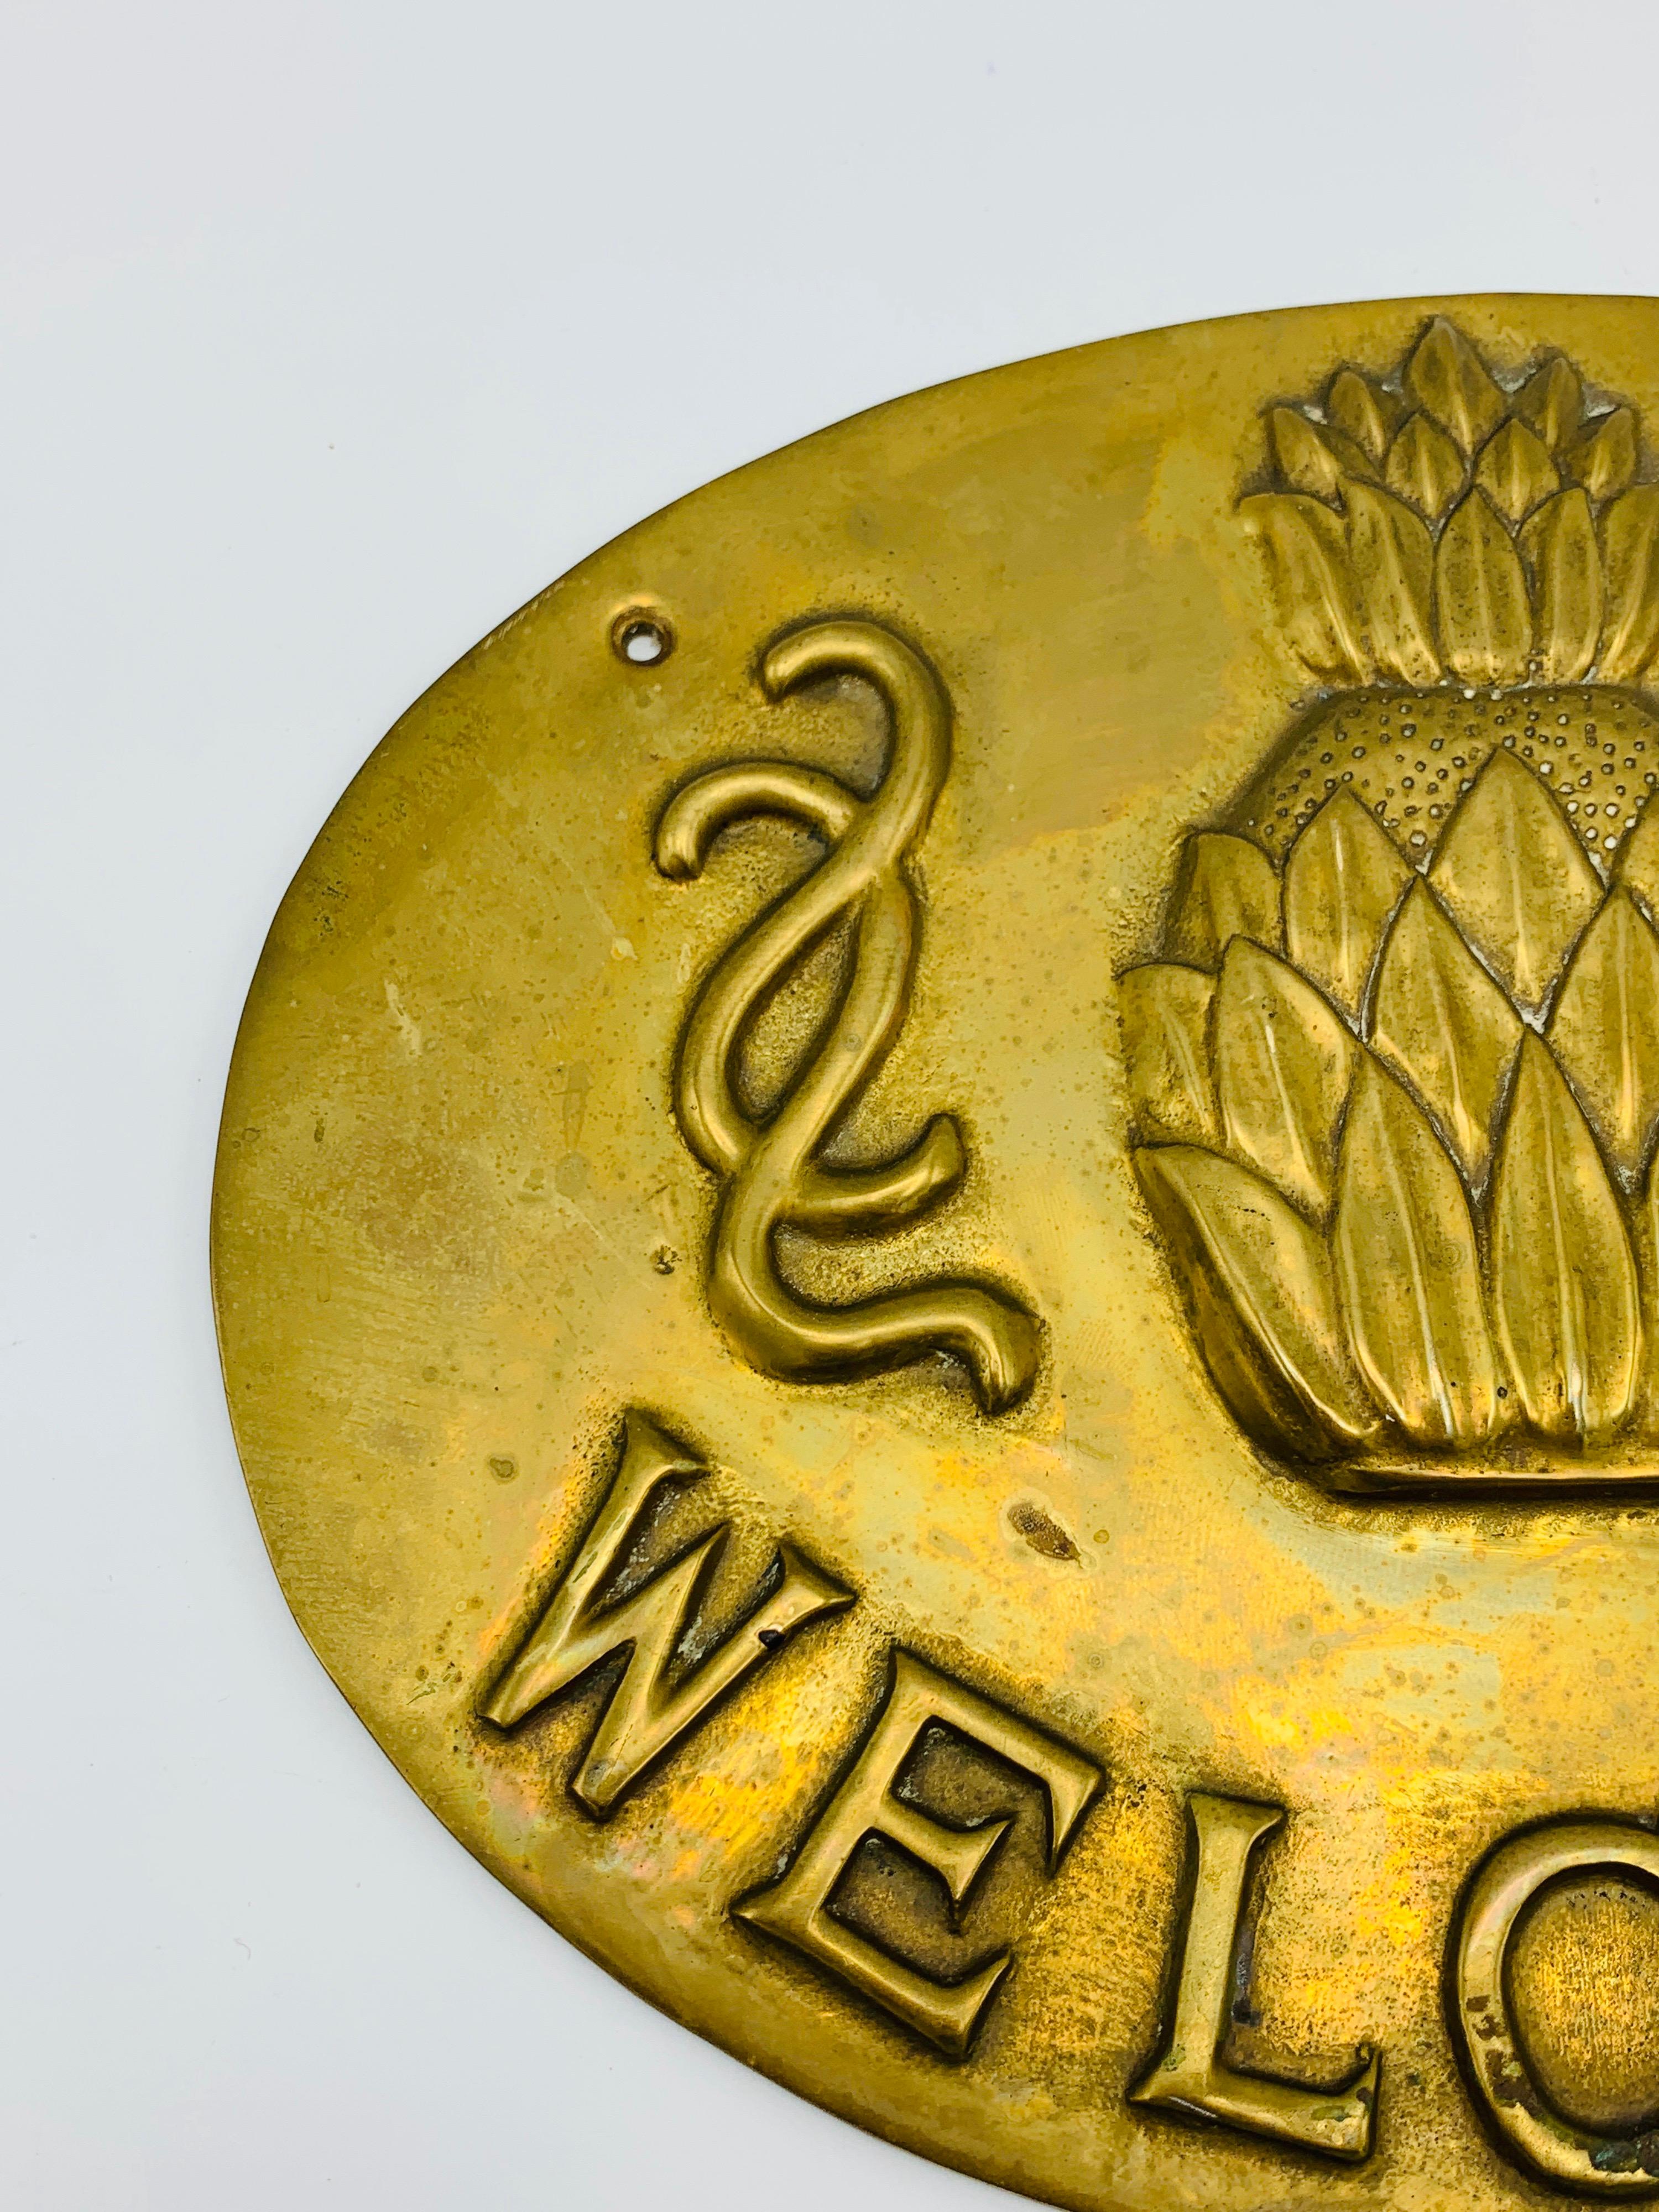 Listed is a beautiful, 1970s solid brass pineapple 'Welcome' wall plaque. Detailed with a raised pineapple in the center, with a floral motif surrounding, and below 'Welcome' stamped into the brass. Heavy, weighing 1.6lbs.